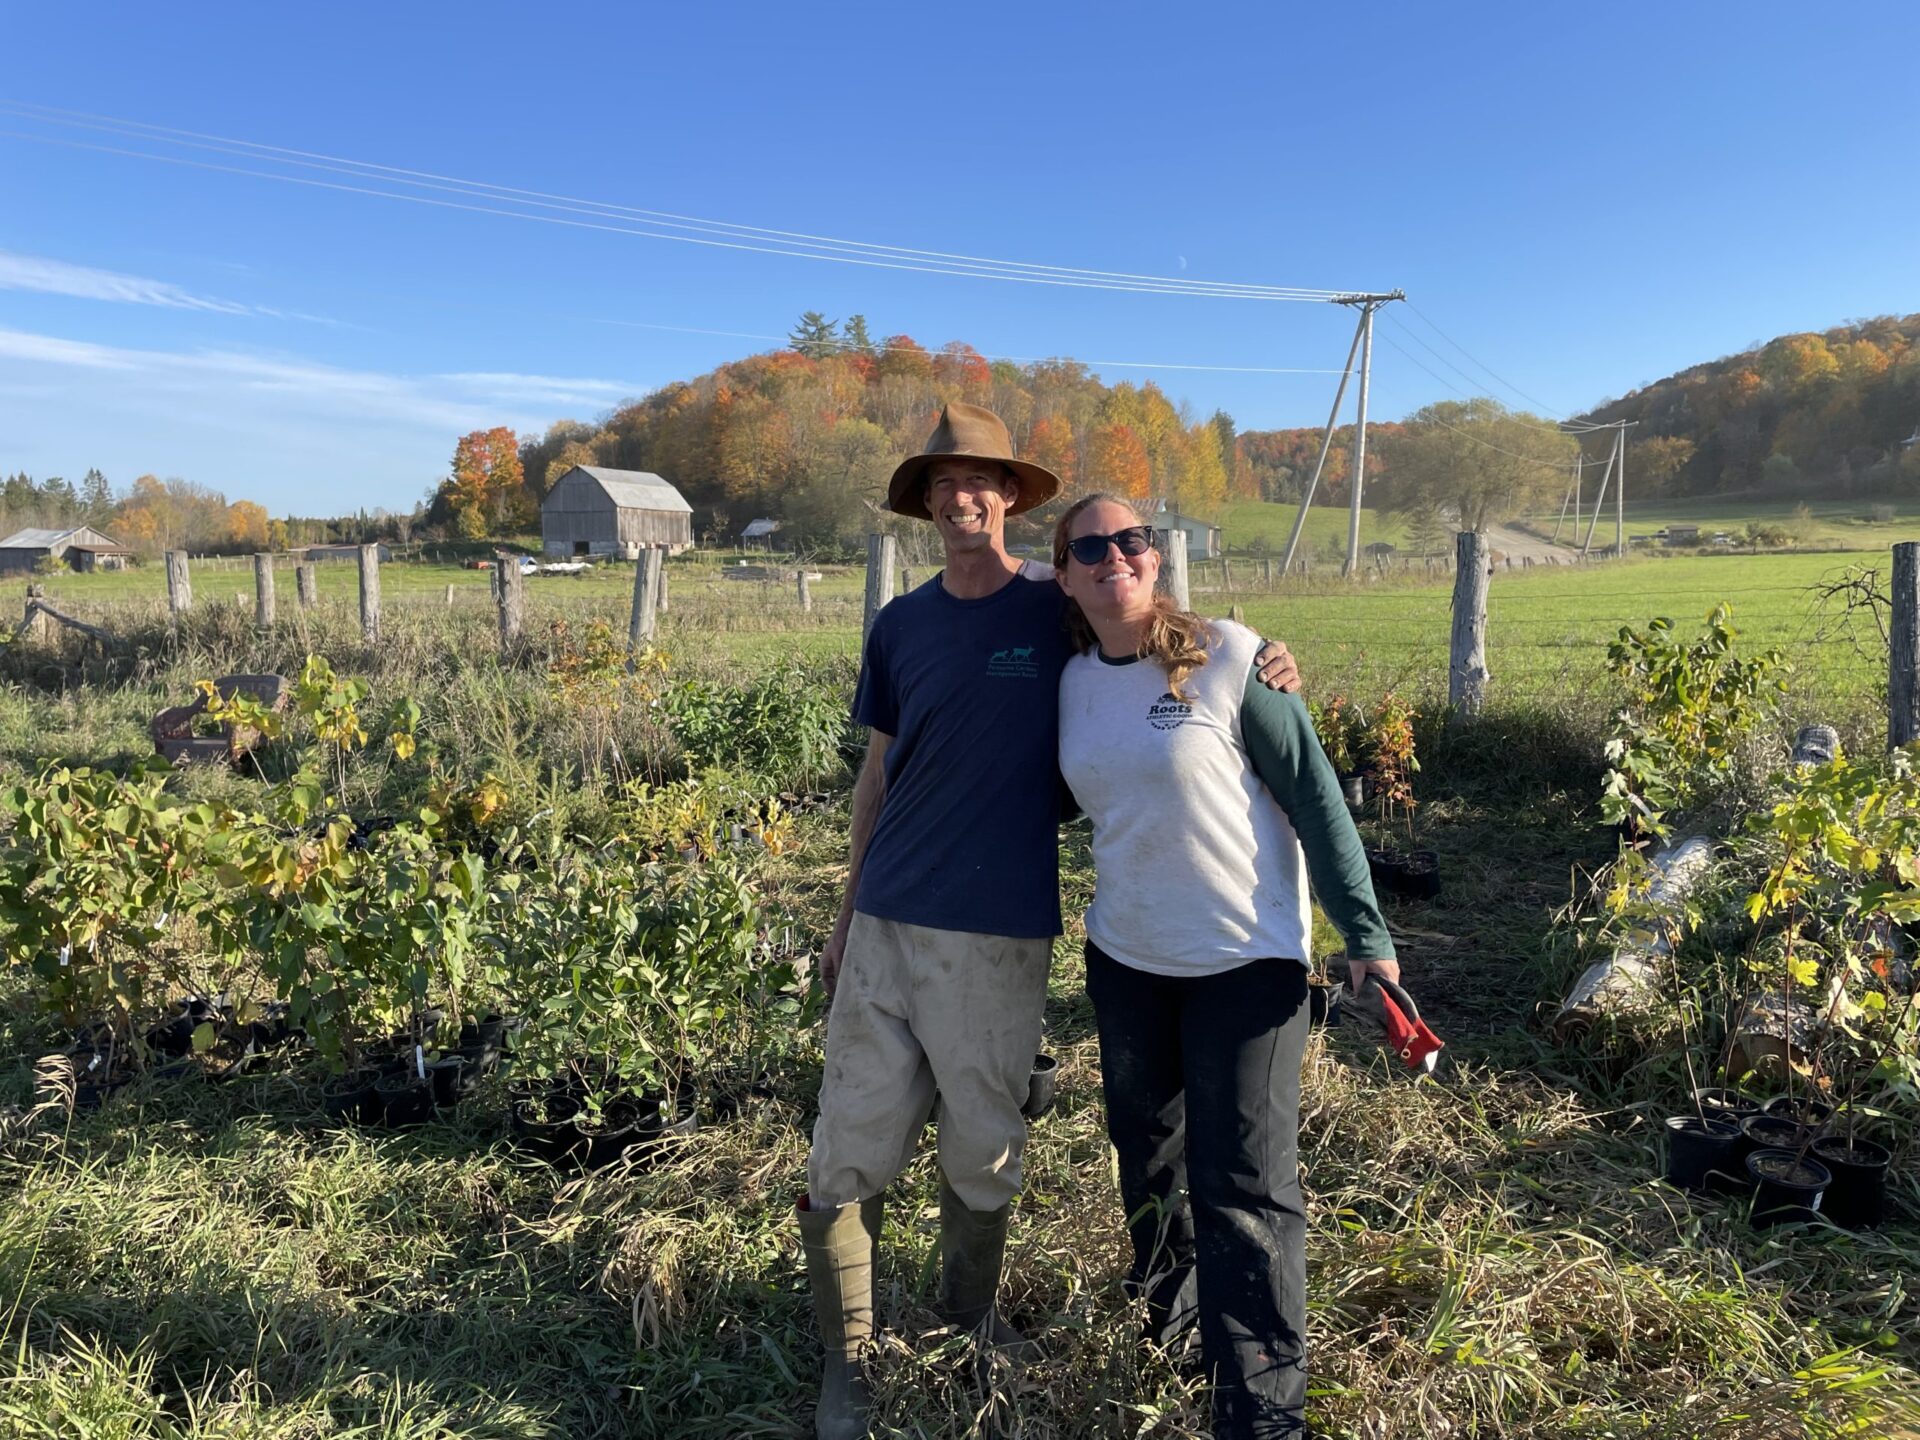 Alyssa Cousineau (right) helps Ian McClatchy with planting trees and shrubs on his farm in Outaouais, Quebec IMG_2276